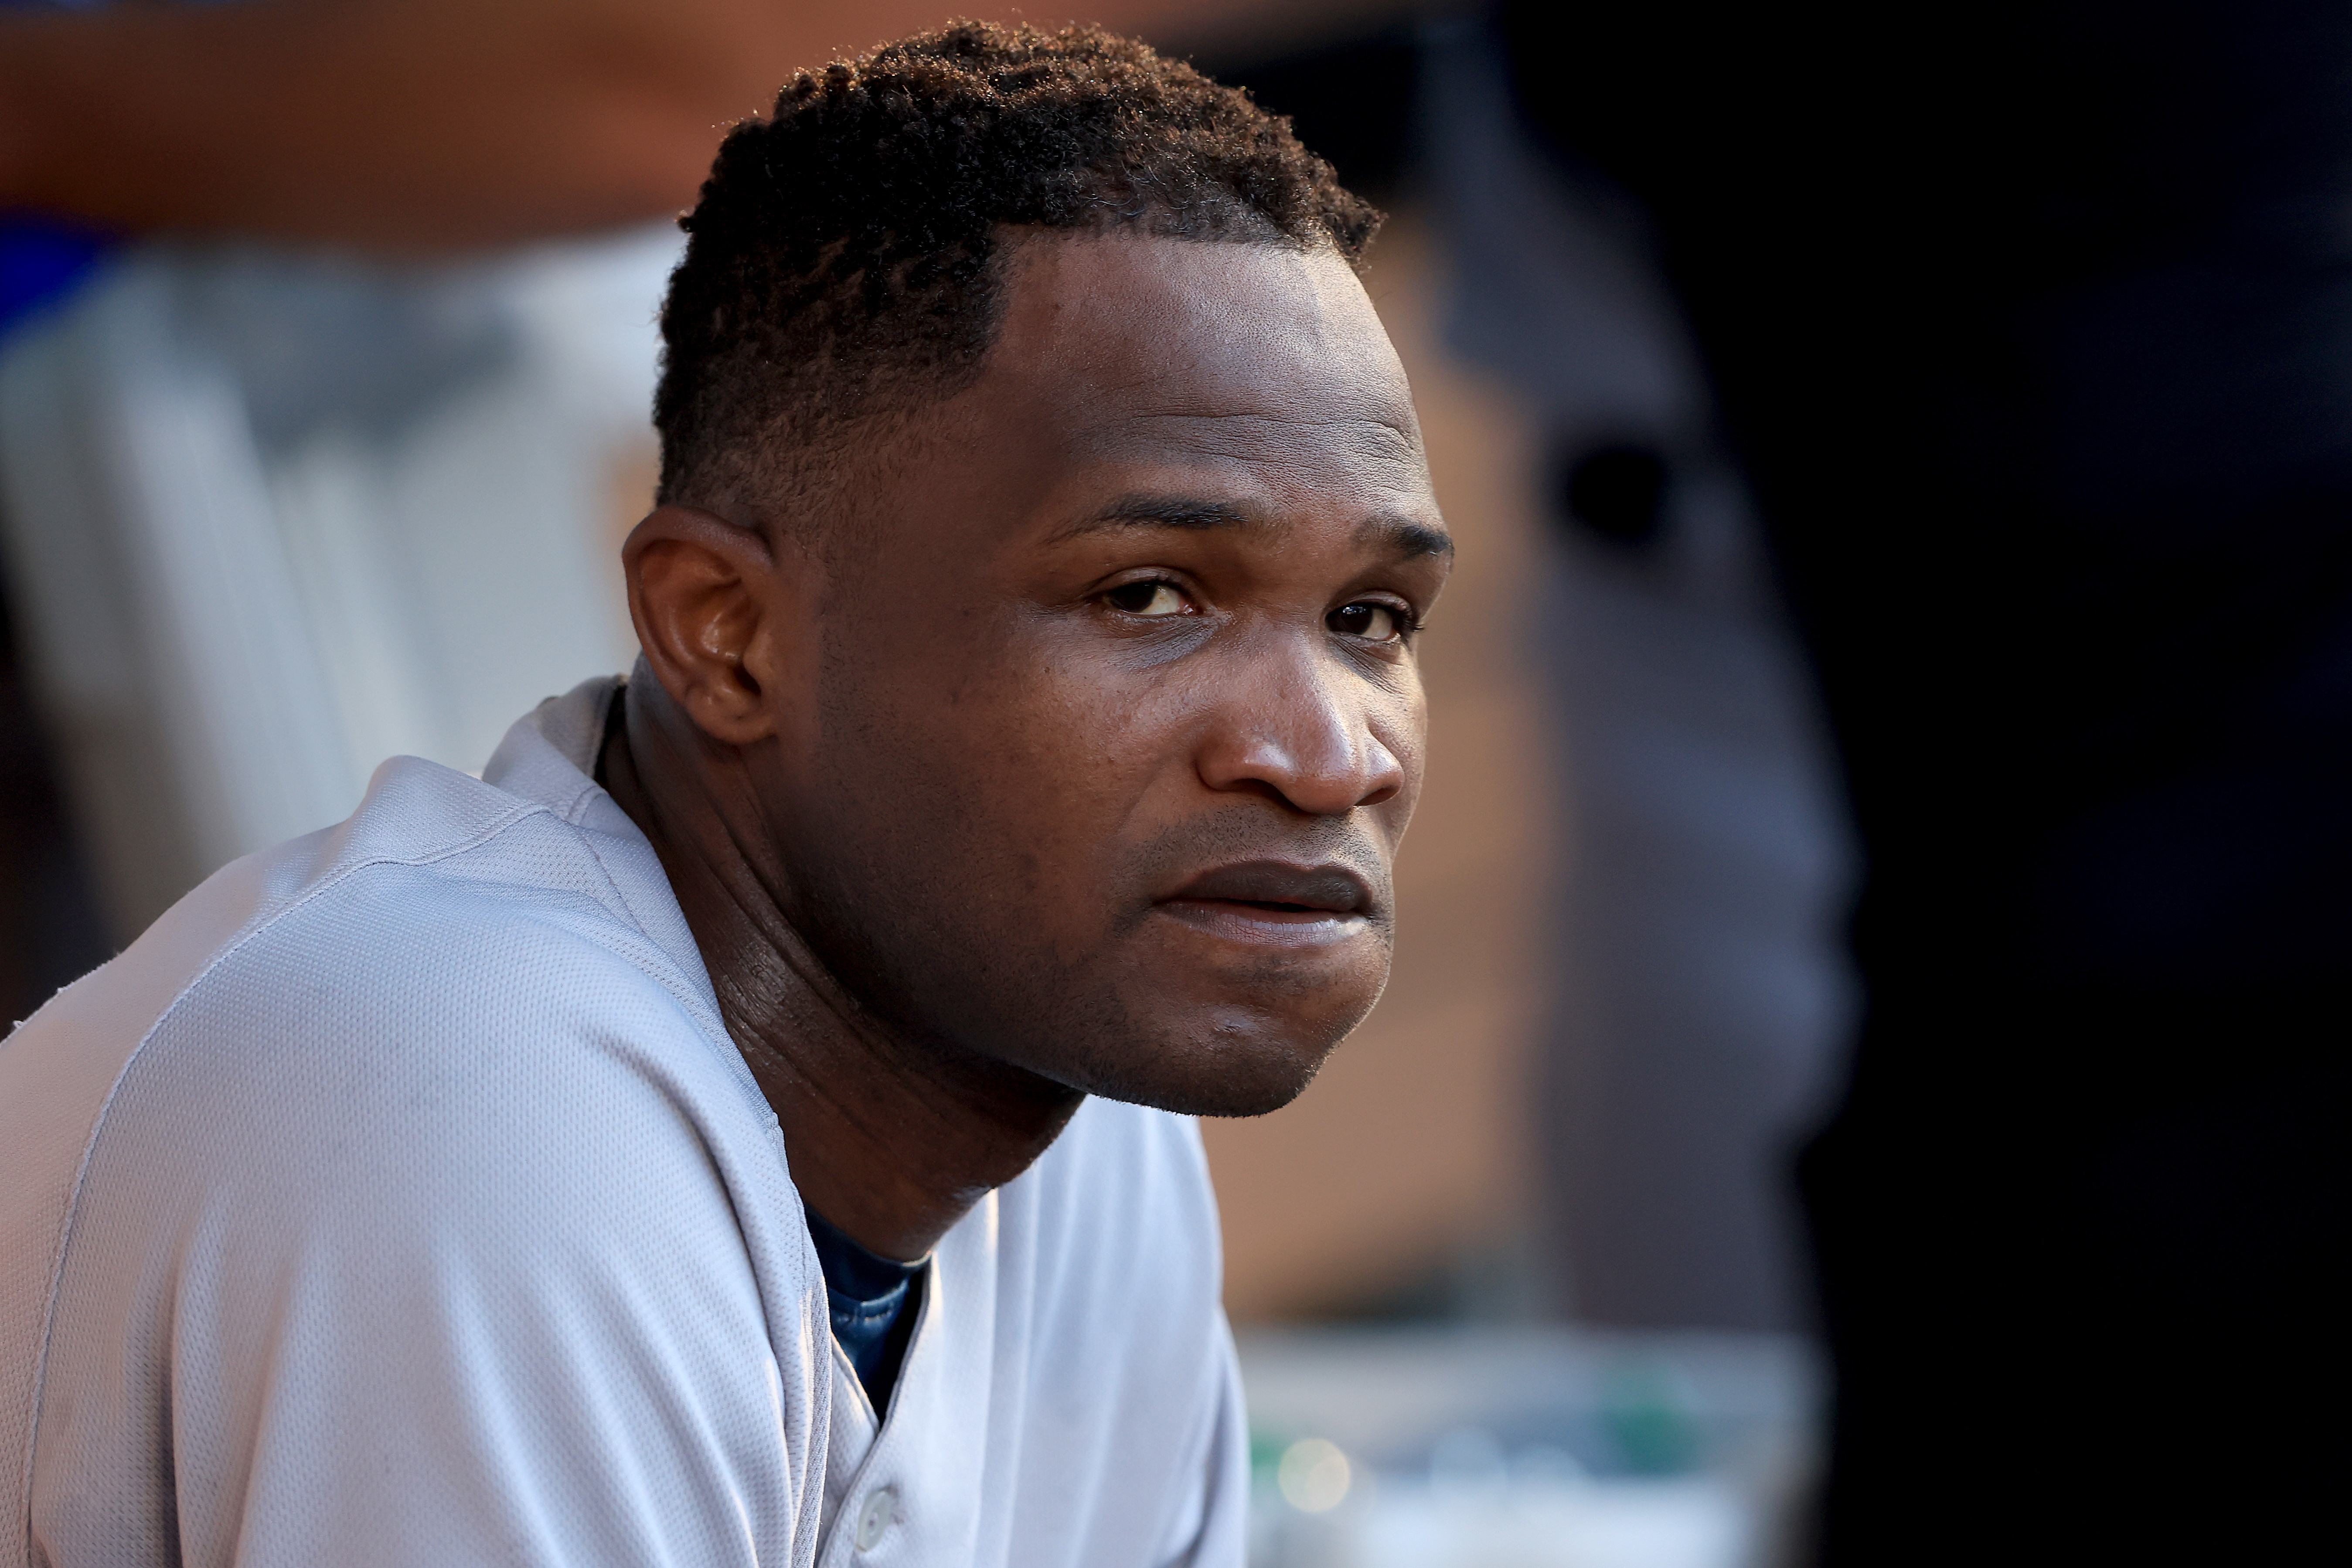 Yankees Domingo German to enter inpatient treatment for alcohol abuse!